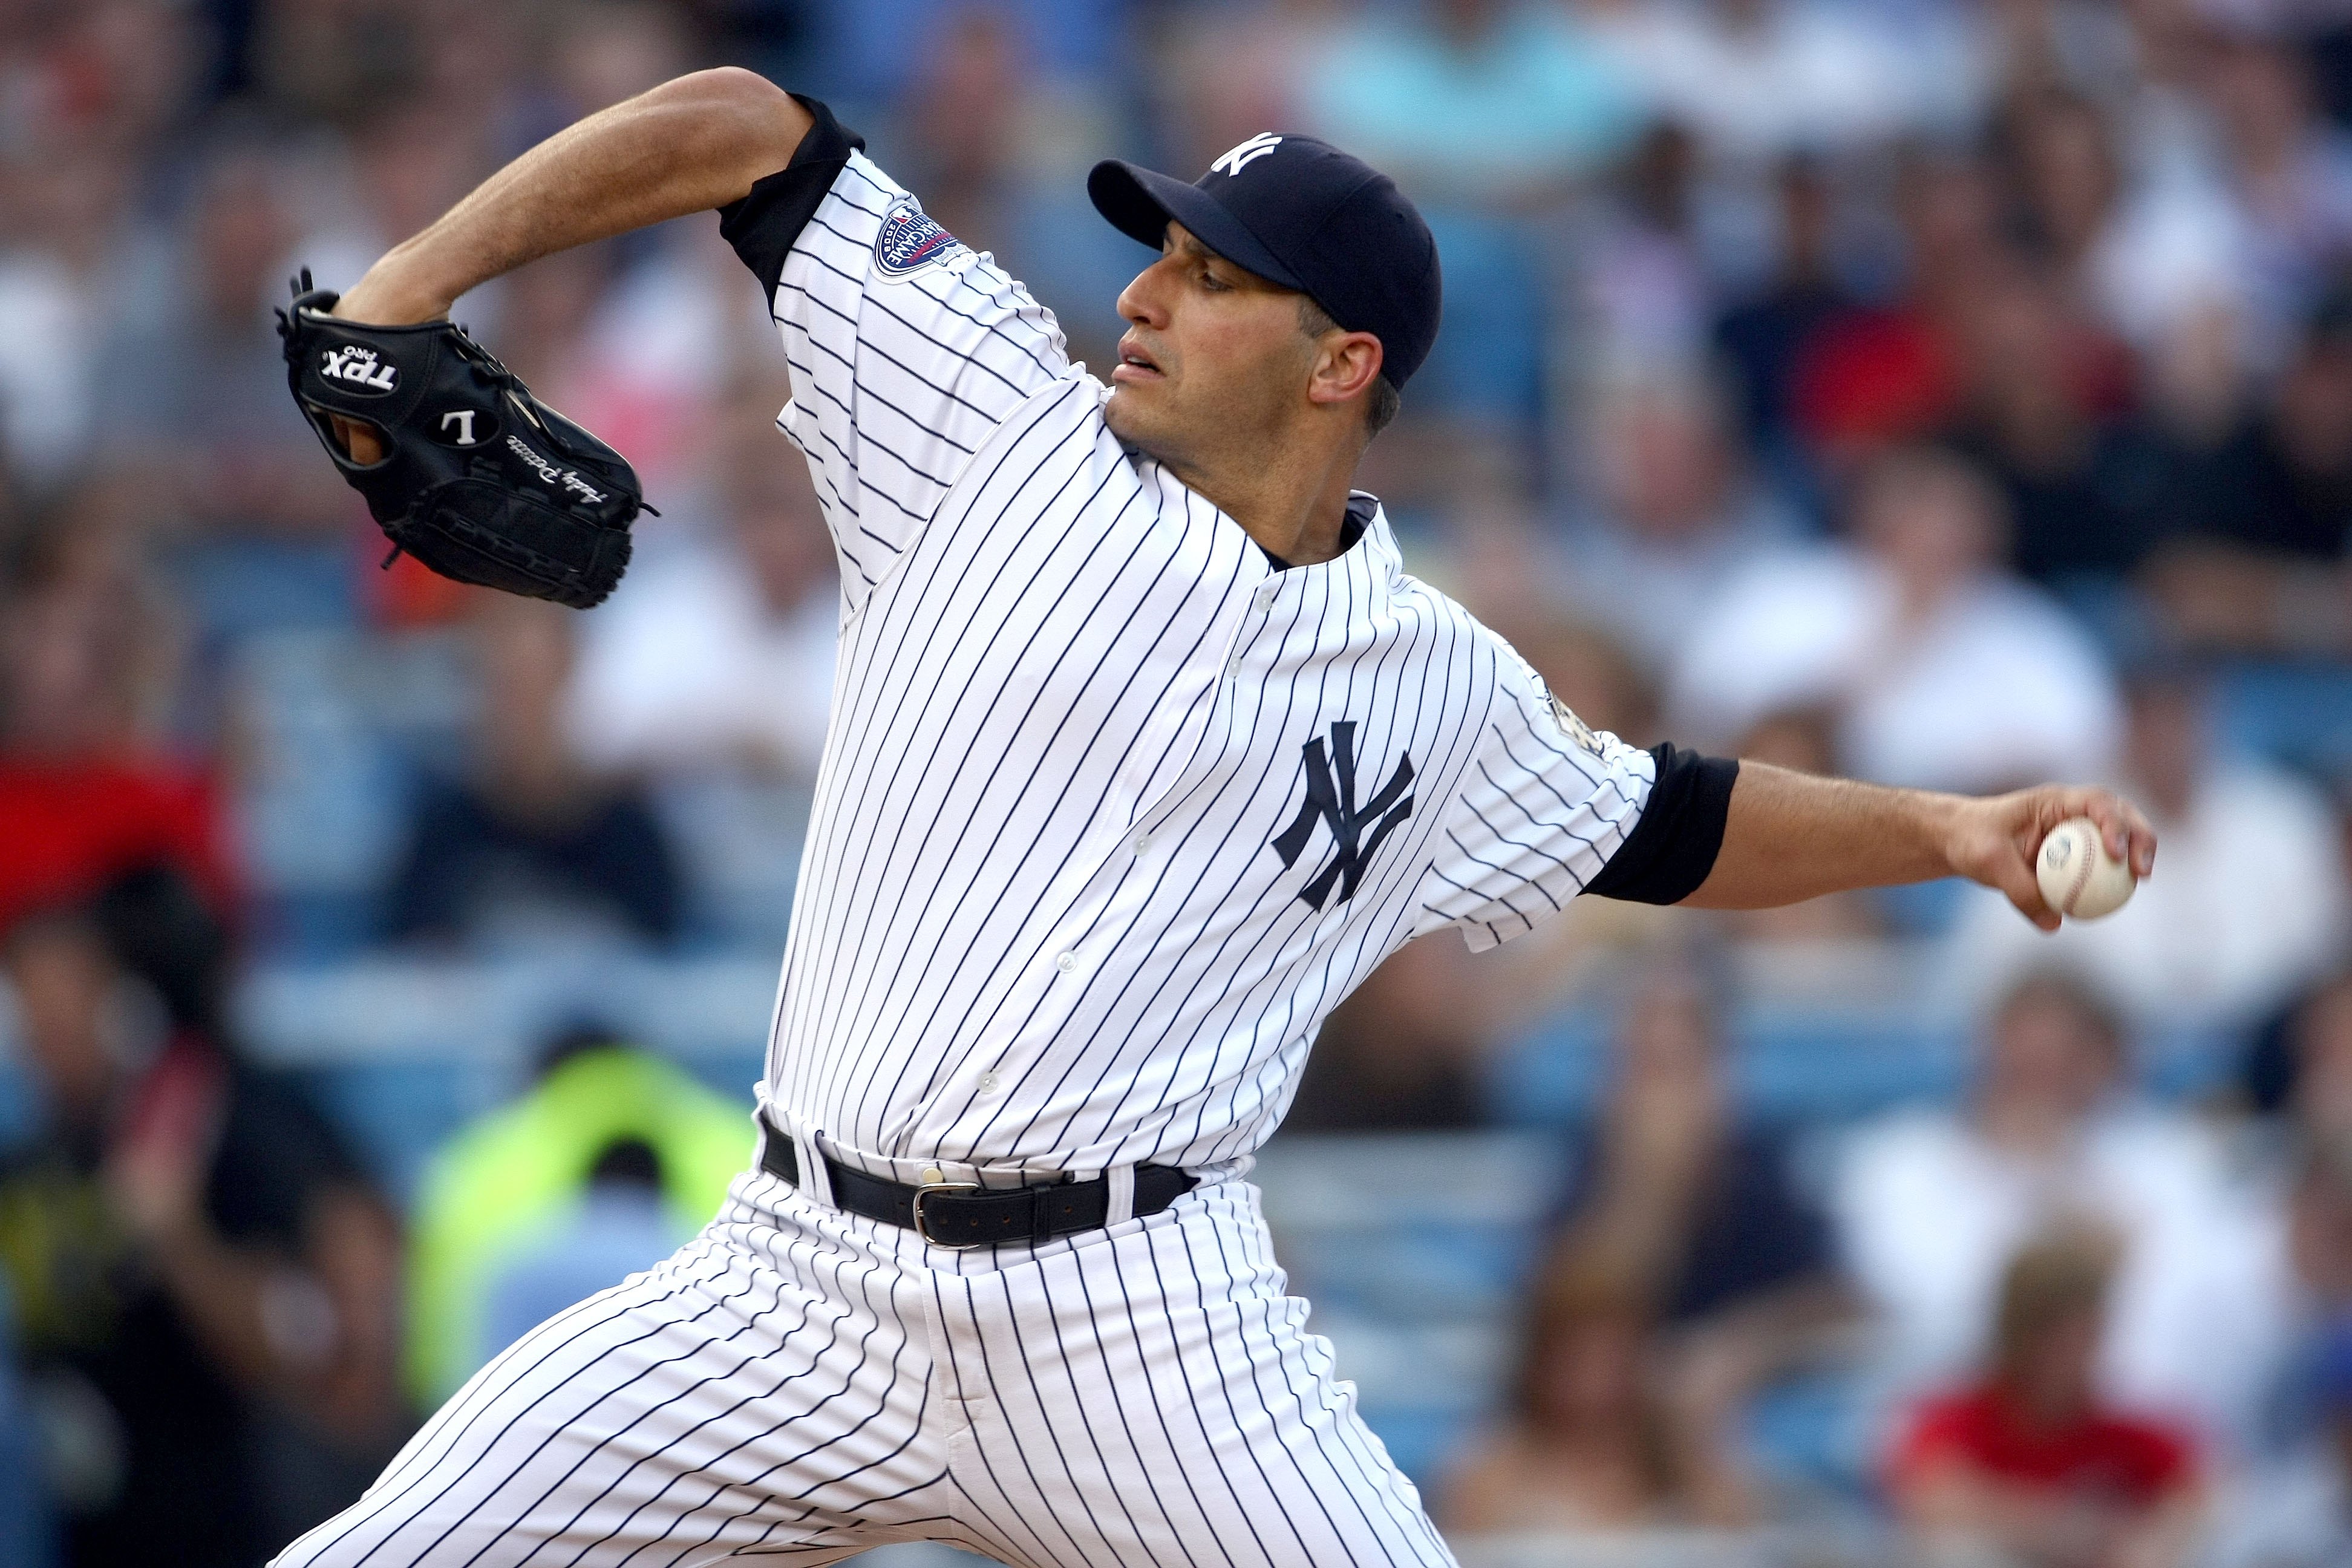 Andy Pettitte rejoins the Yankees as a pitching adviser and is